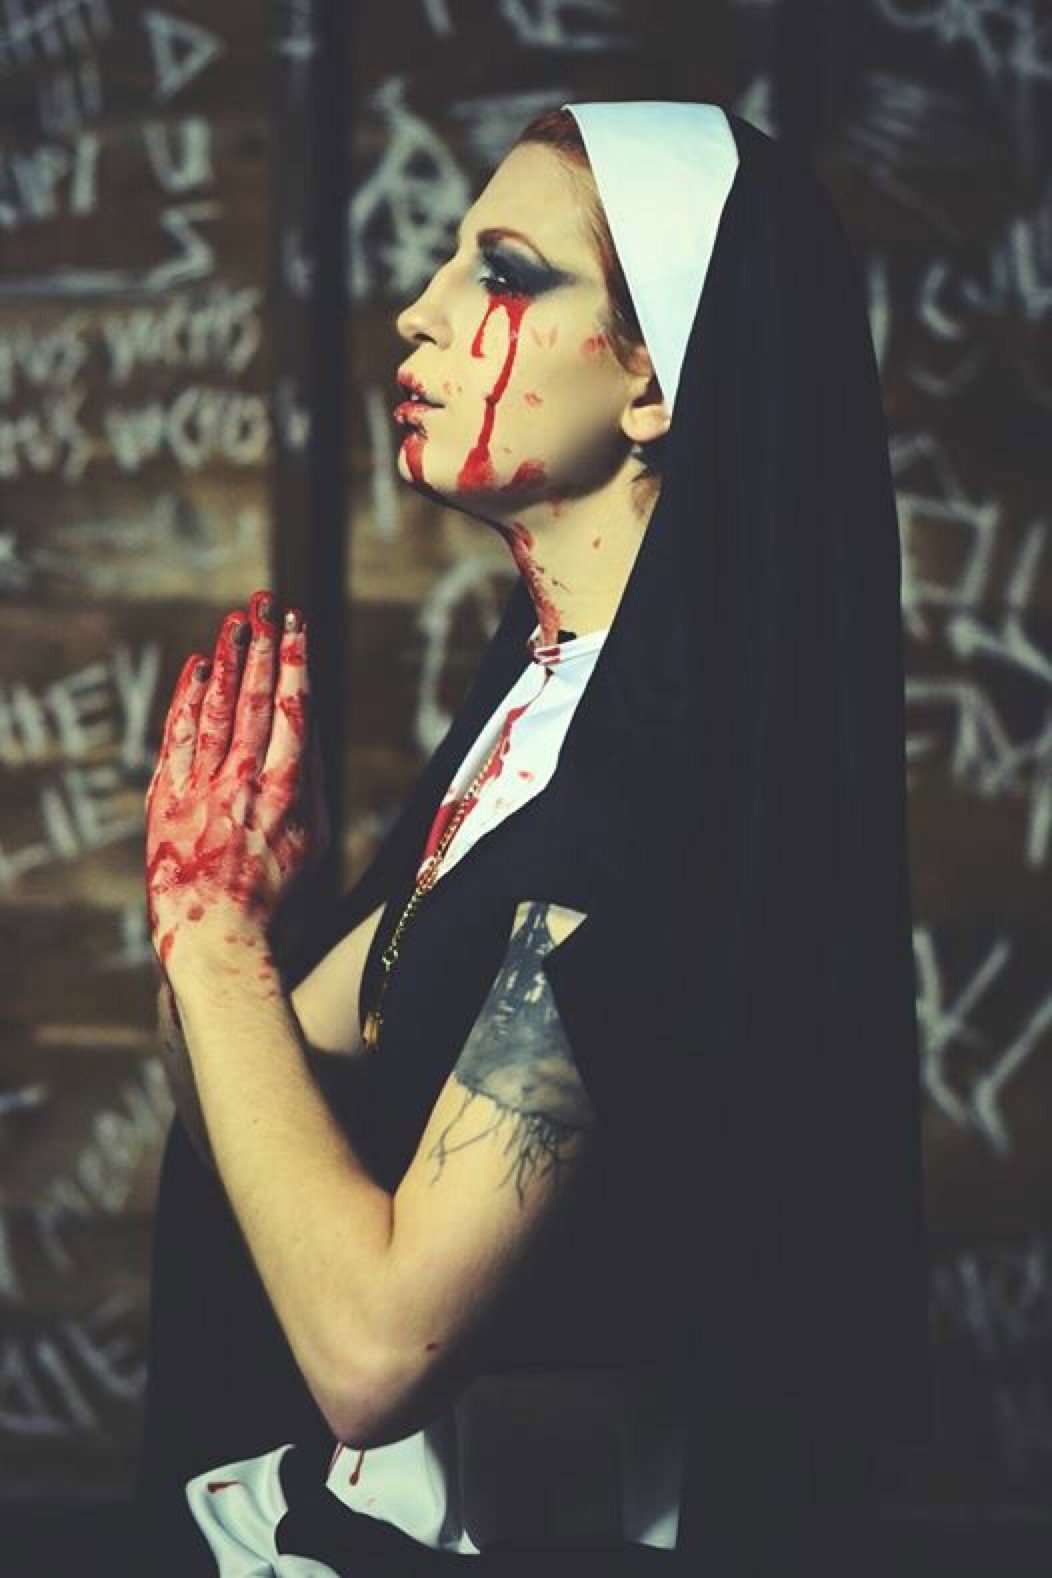 Photo by Schadenfreude with the username @Schadenfreude,  November 23, 2015 at 1:50 AM and the text says 'hjsteele:

Model @hjsteele
Photography by AP Skyline #nun  #blood  #macabre  #nsfw  #multi  #pic  #prayer'